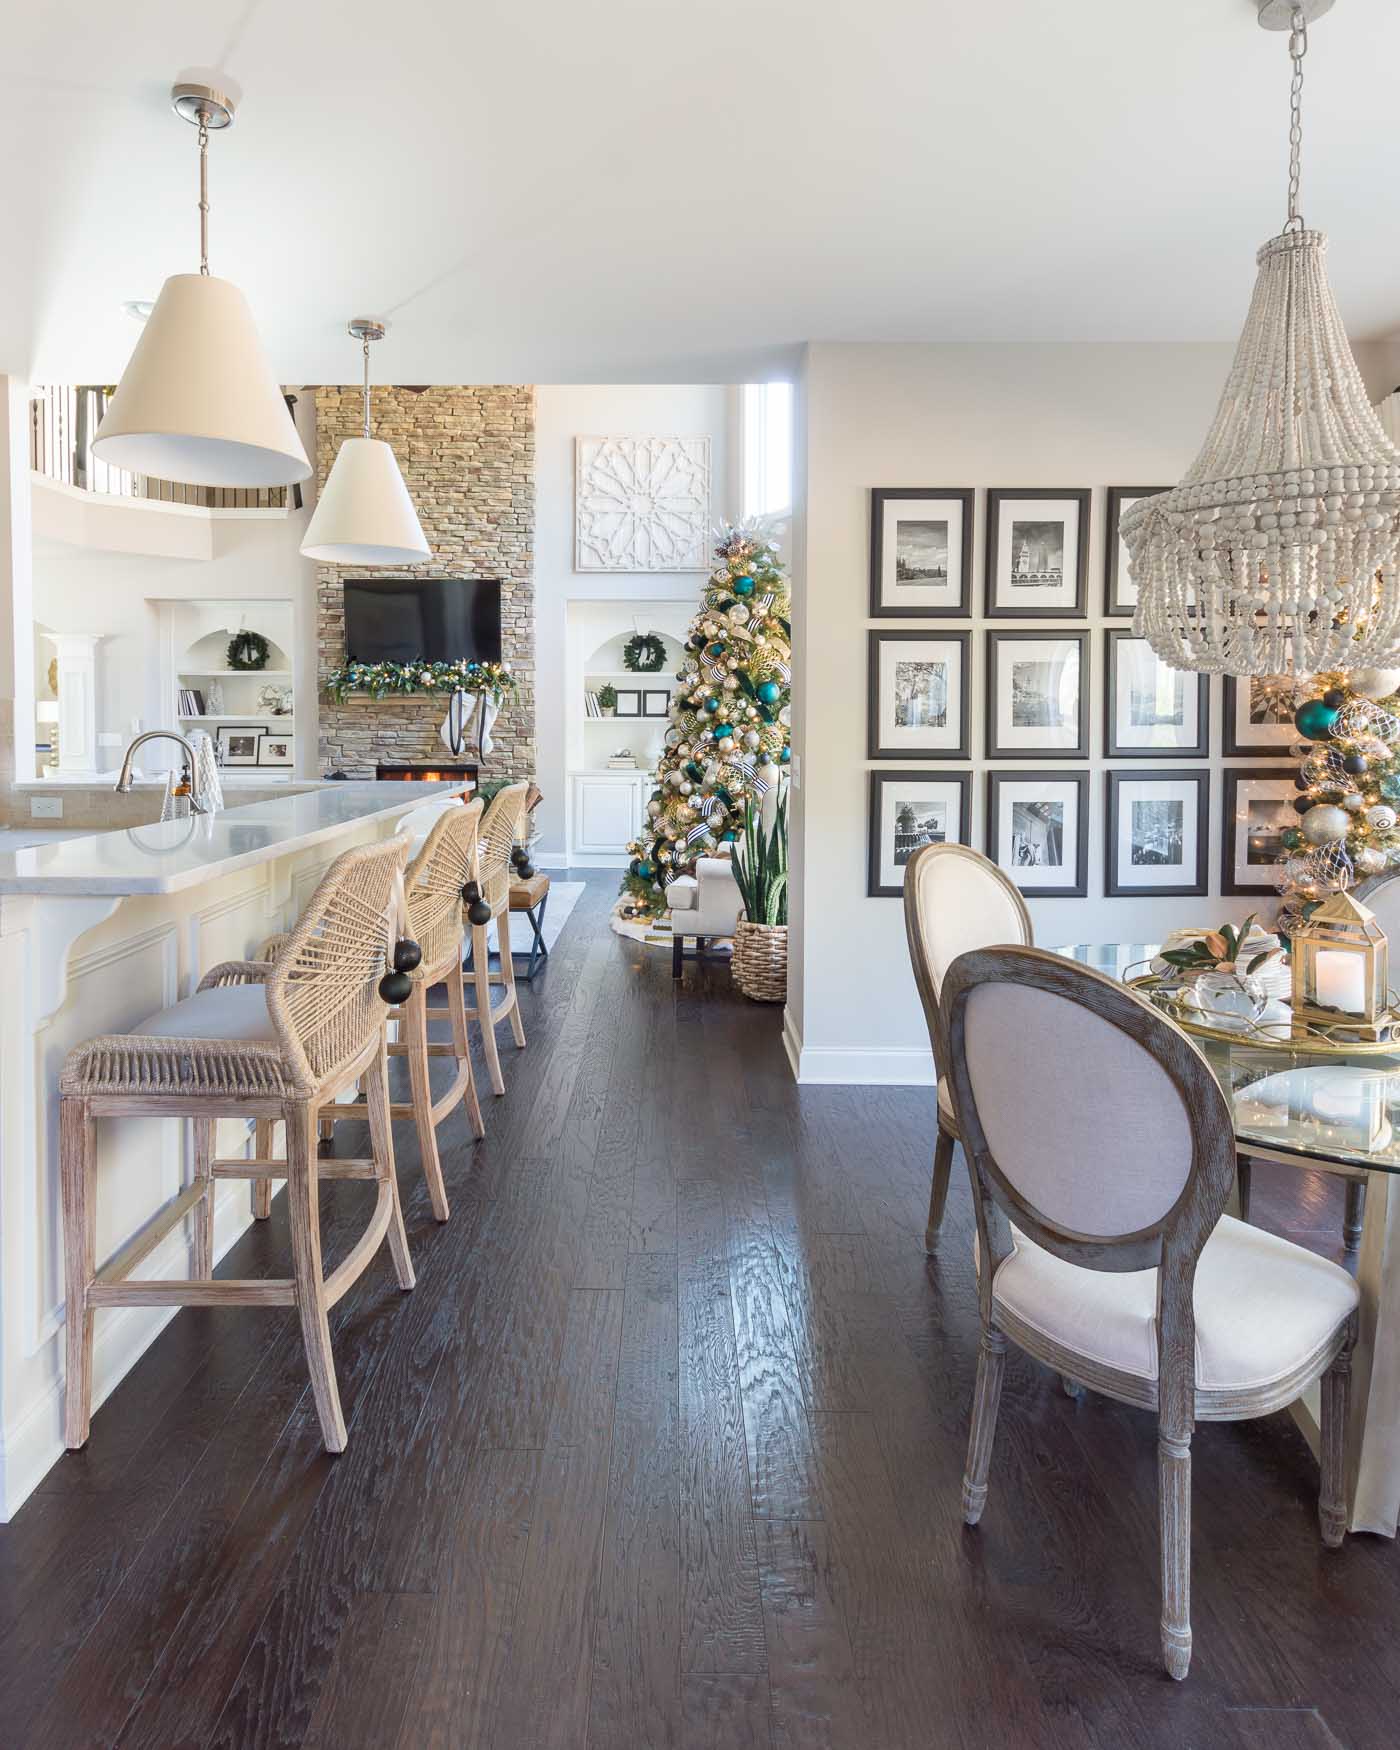 Christmas home tour with open concept Christmas decorations and styling ideas